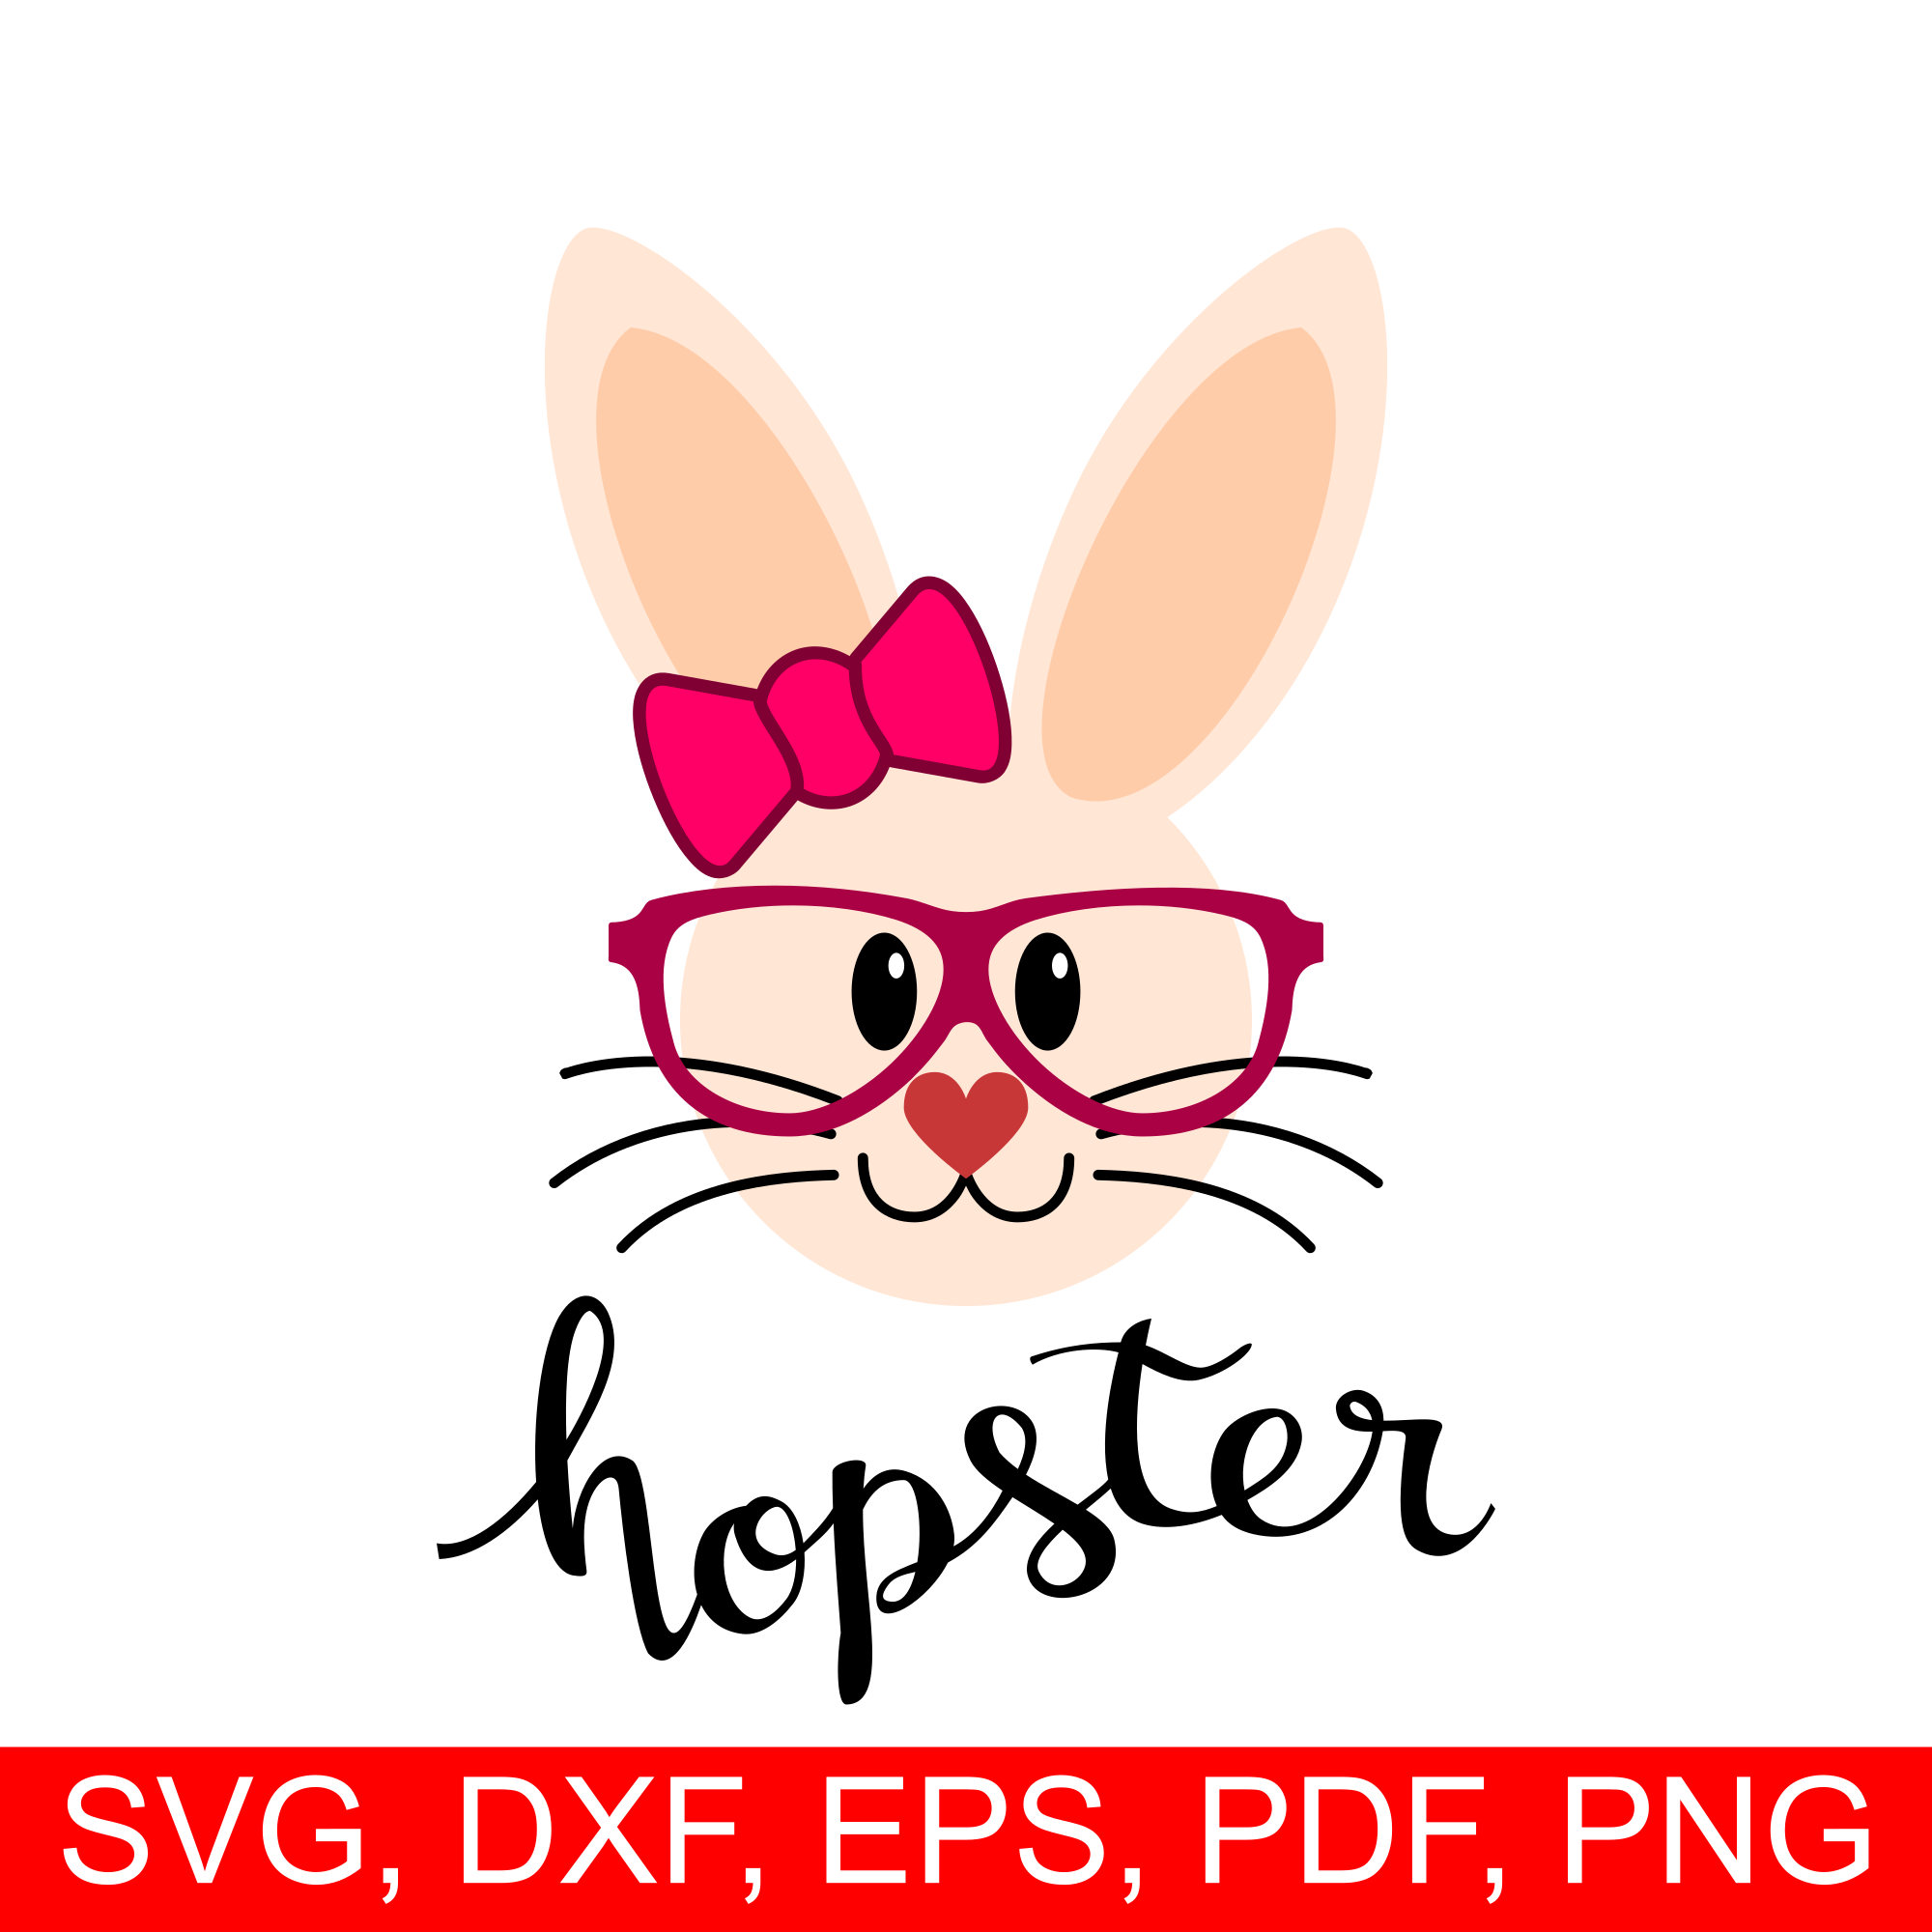 Miss easter hopster bunny. Bunnies clipart hipster